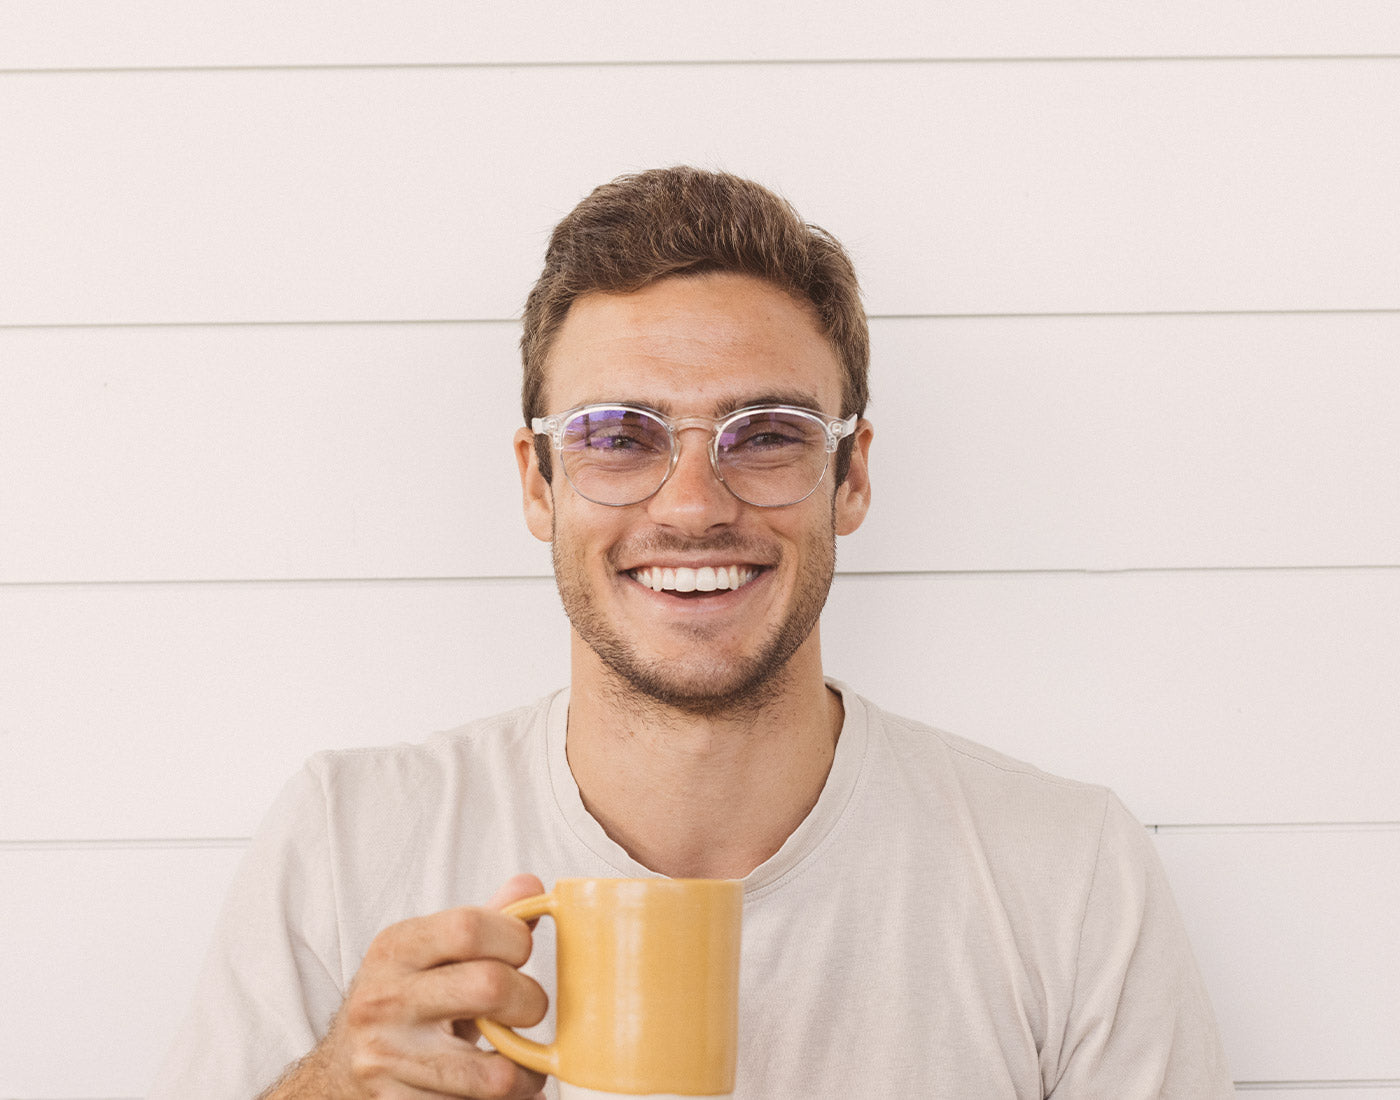 guy holding a cup of coffee laughing wearing sunski avila bluelight glasses